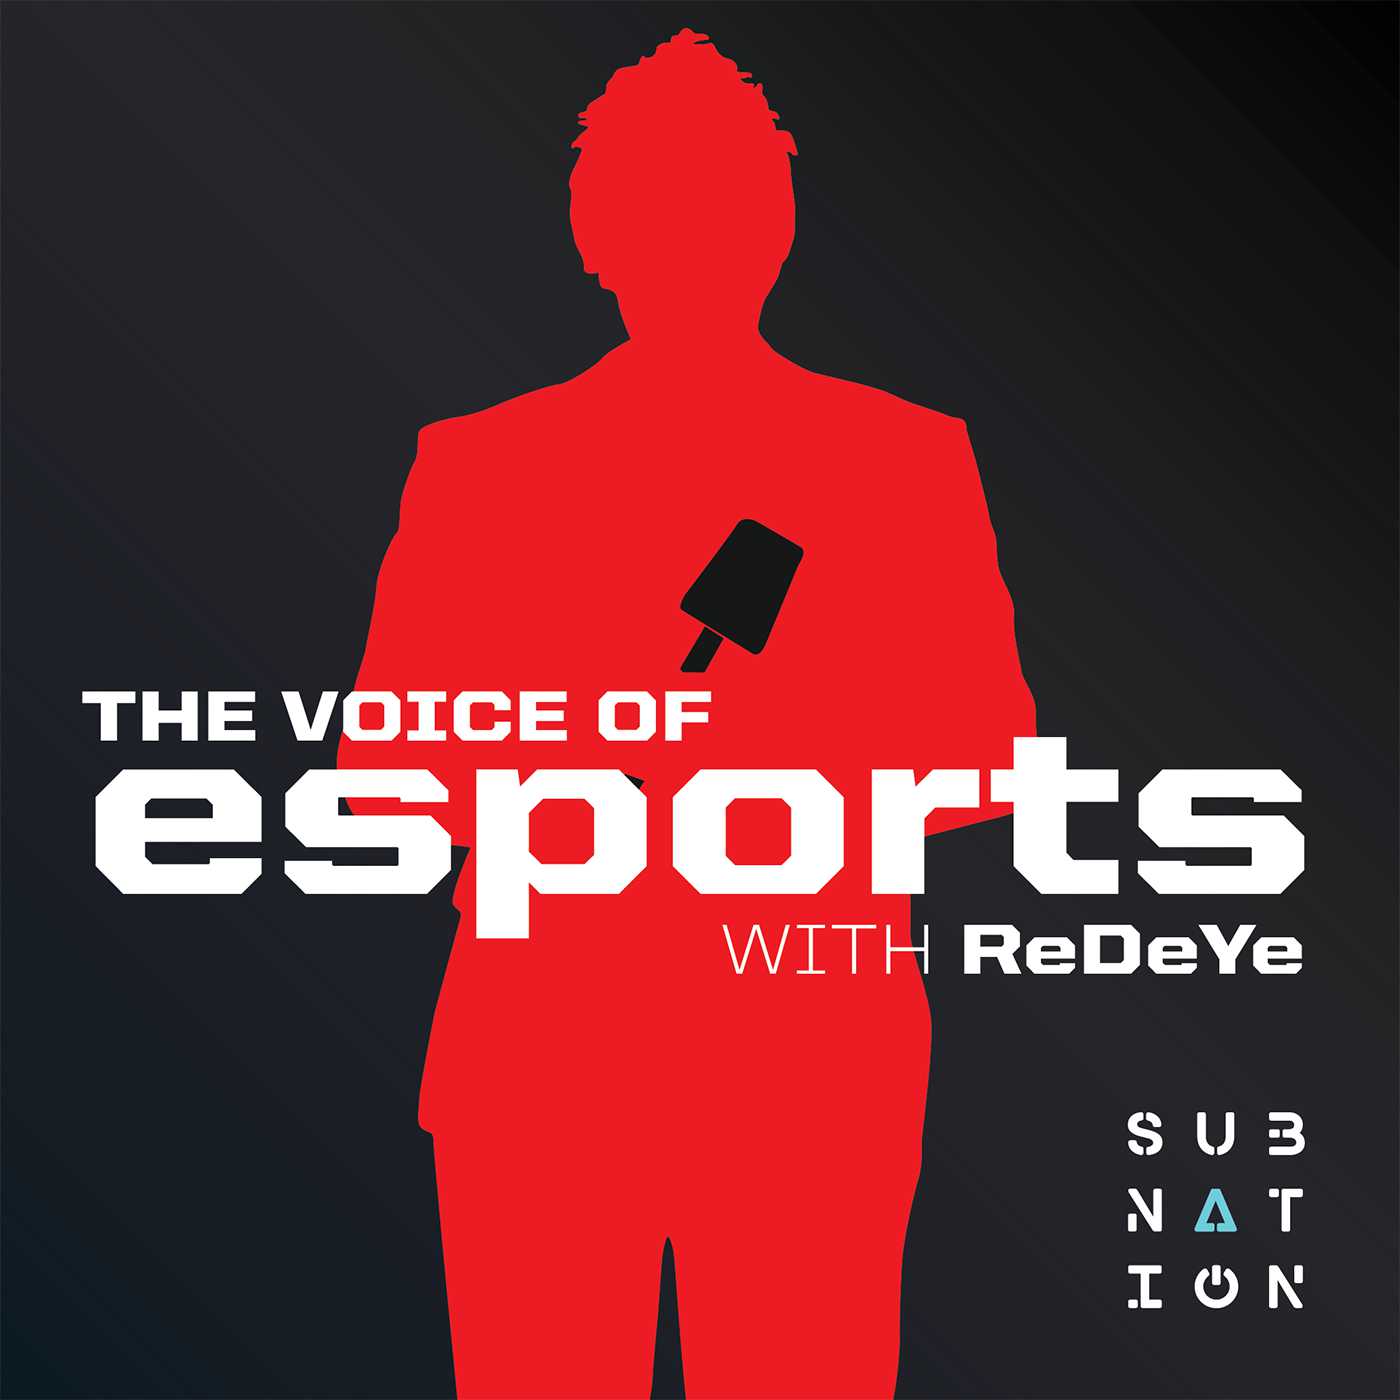 “THE VOICE OF ESPORTS” ORIGINAL SUBNATION PODCAST TO DEBUT THIS MONTH ON WESTWOOD ONE  PODCAST NETWORK